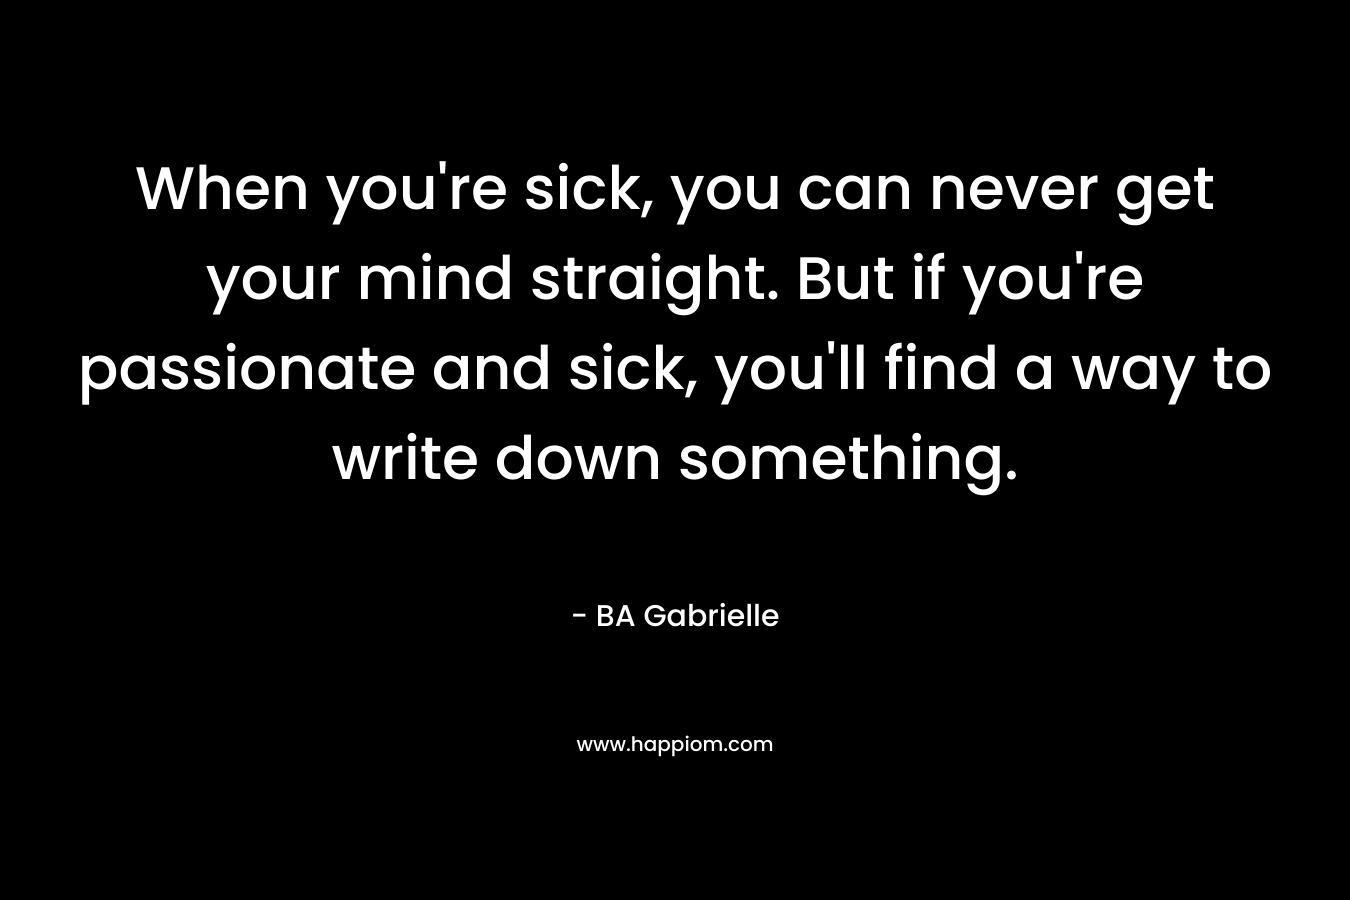 When you're sick, you can never get your mind straight. But if you're passionate and sick, you'll find a way to write down something.